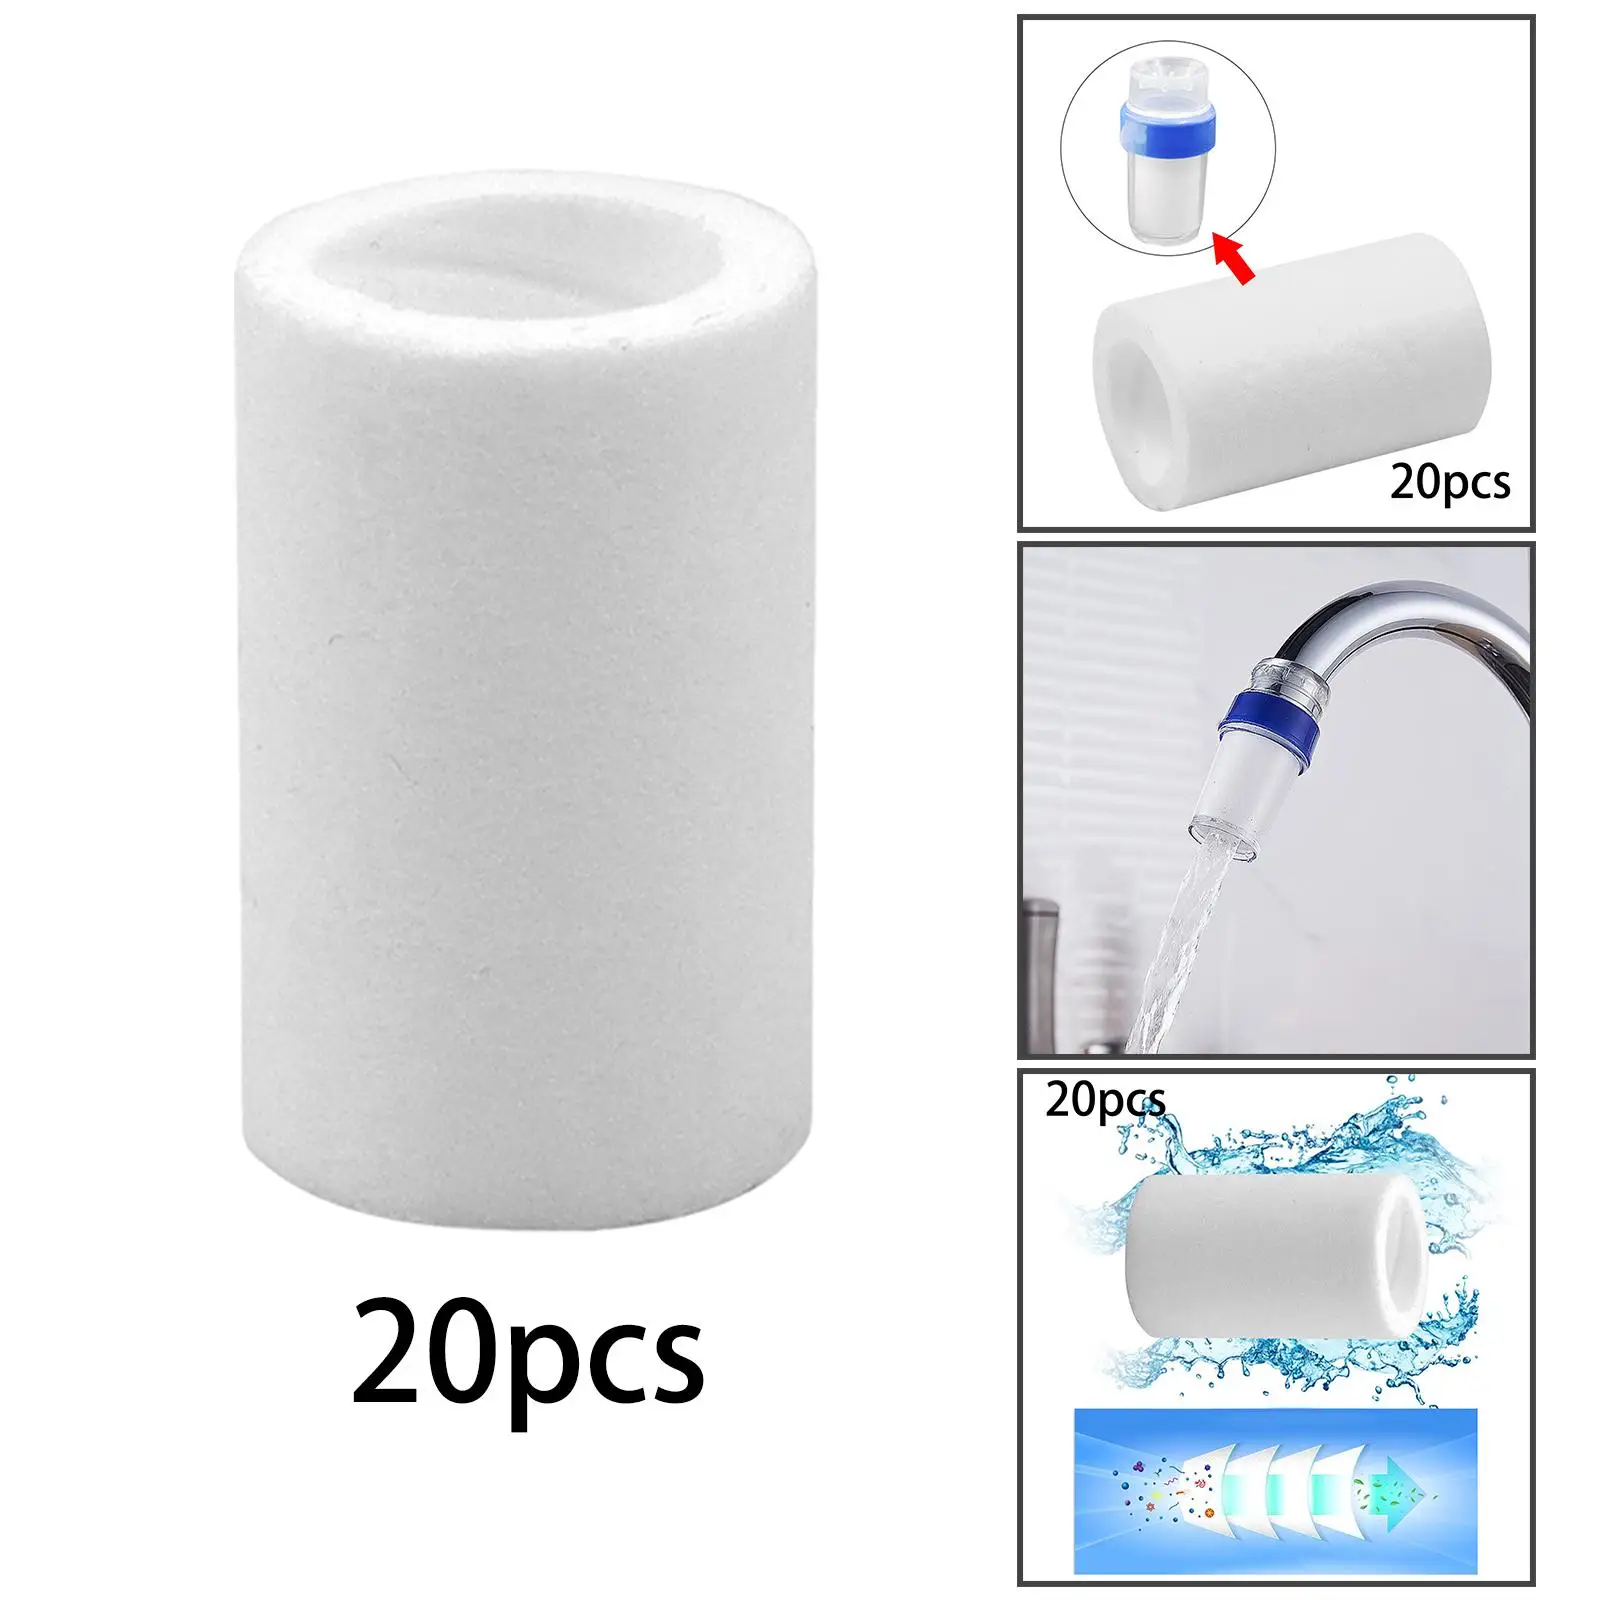 20 Pieces Faucet Filter Replacement for Bathroom Attachment Accessories